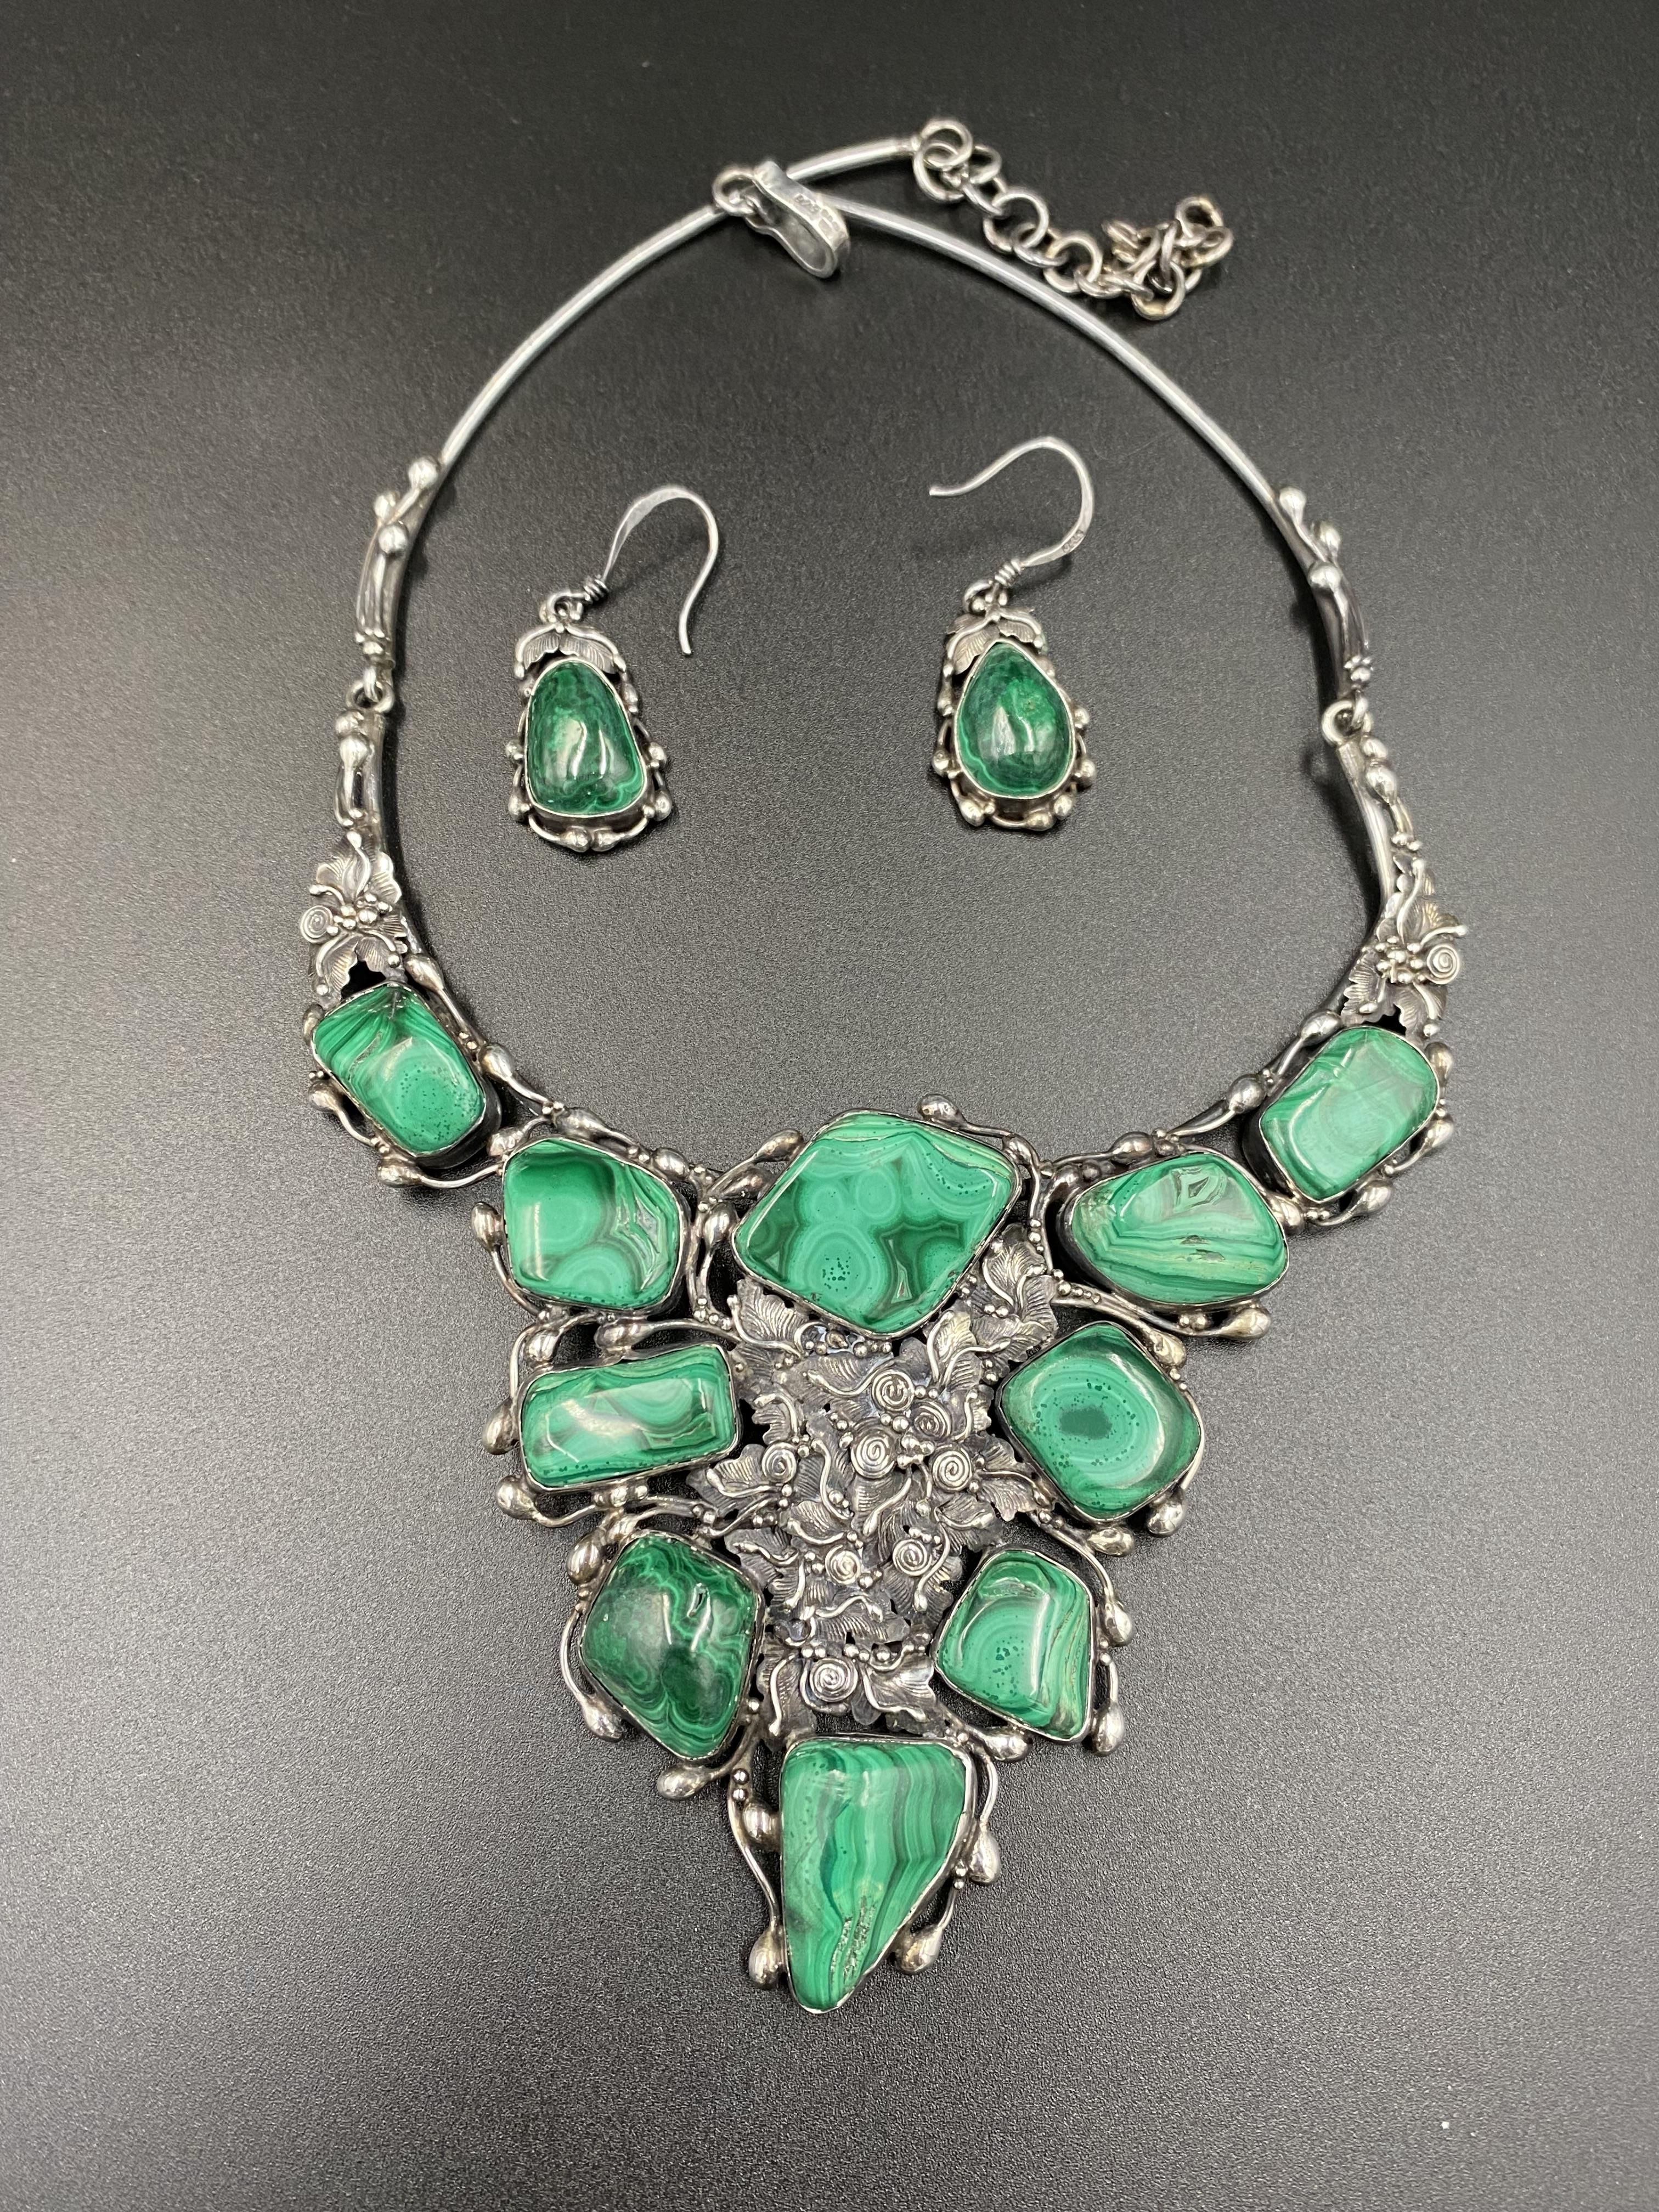 Silver and malachite necklace and earring set - Image 4 of 4